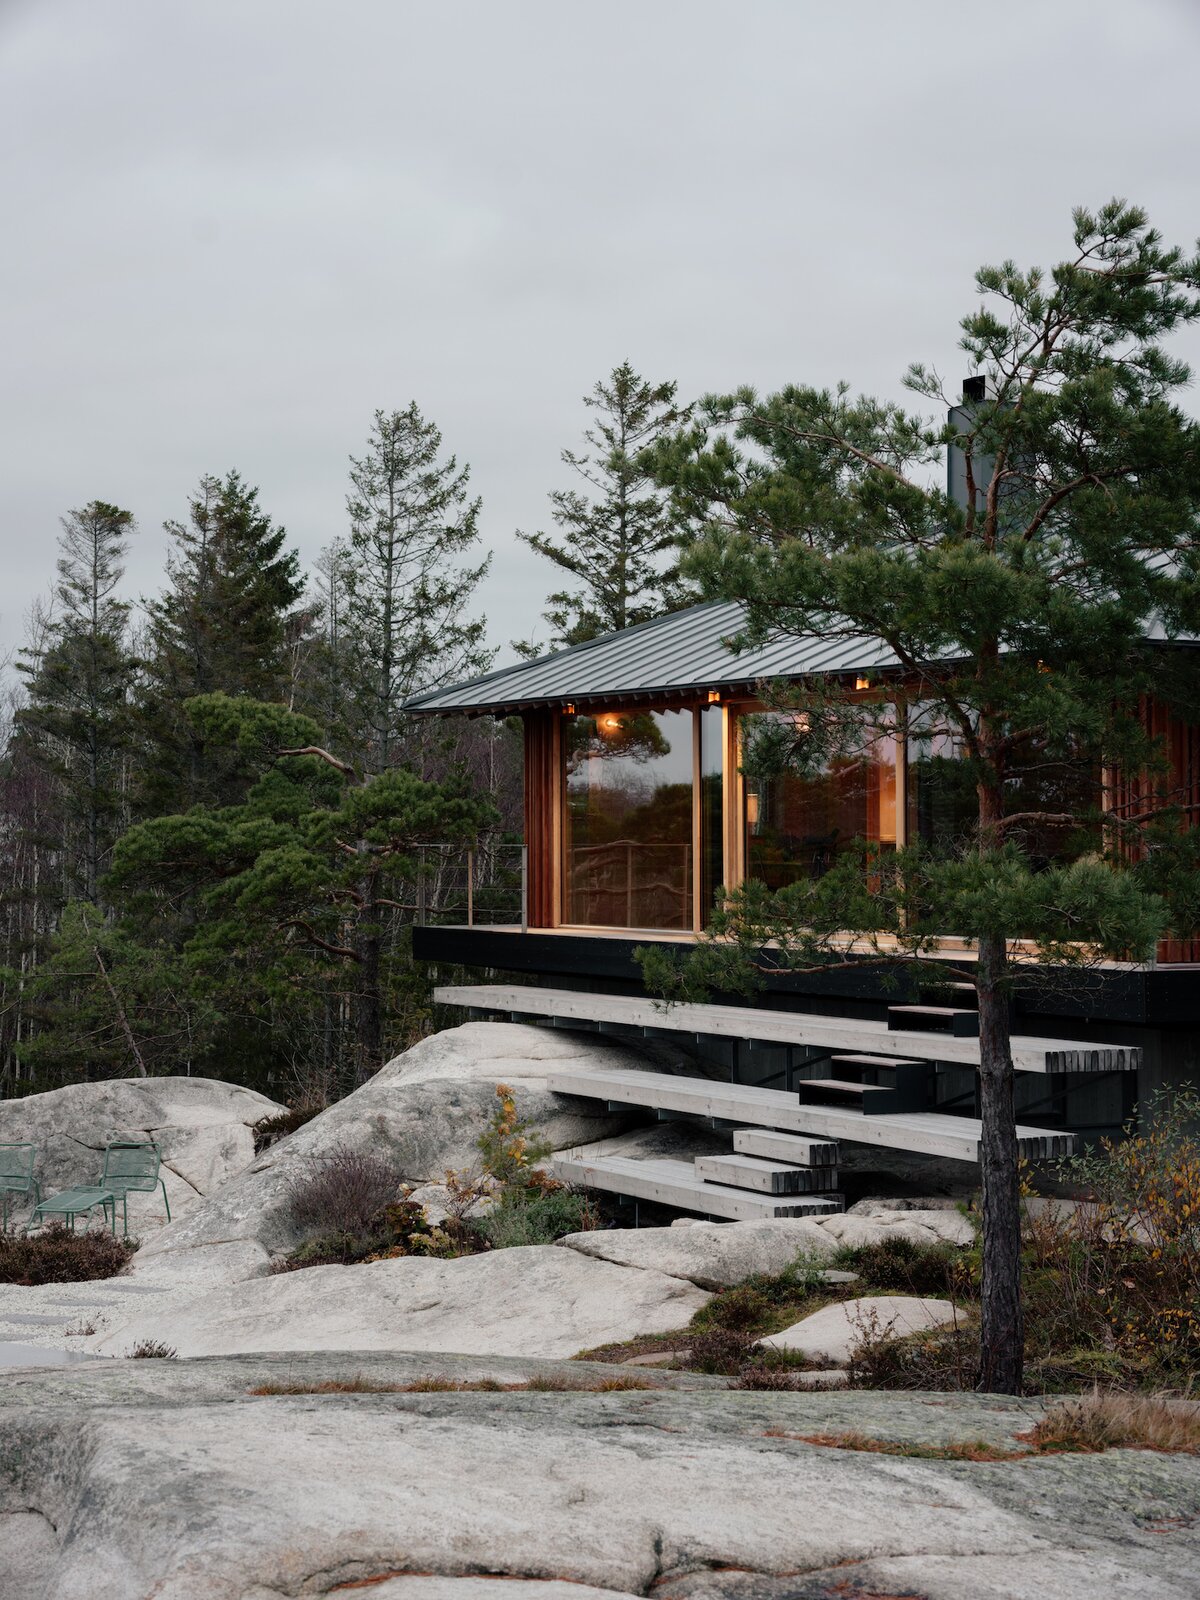 A Cedar-Clad Cabin With a Glass “Sunroof” Rises on a Hillside in Norway